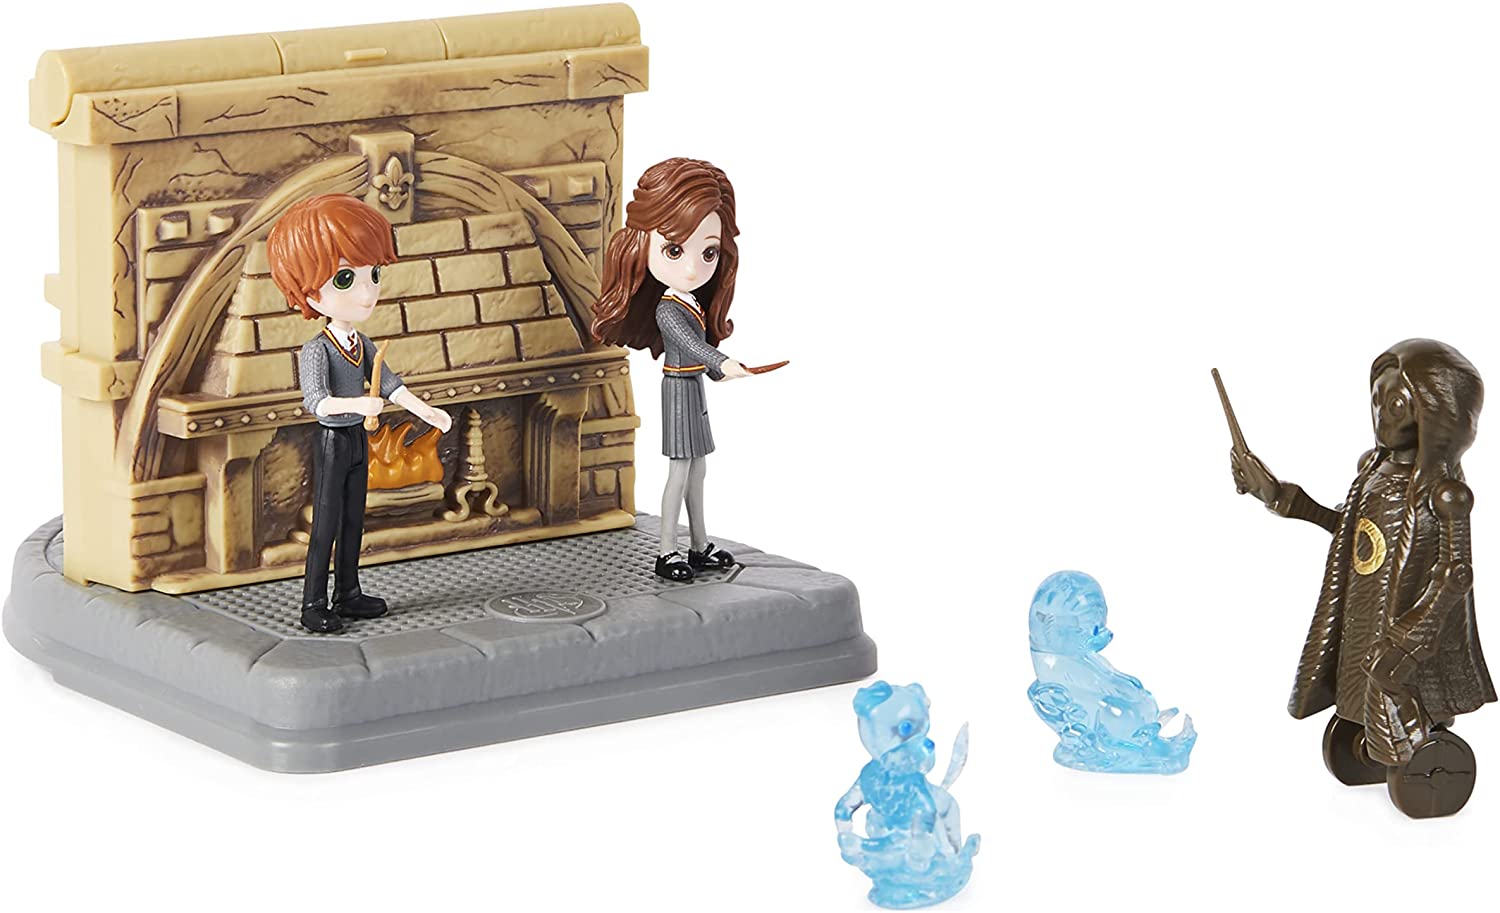 Wizarding World, Magical Minis Harry Potter & Cho Chang Friendship Set